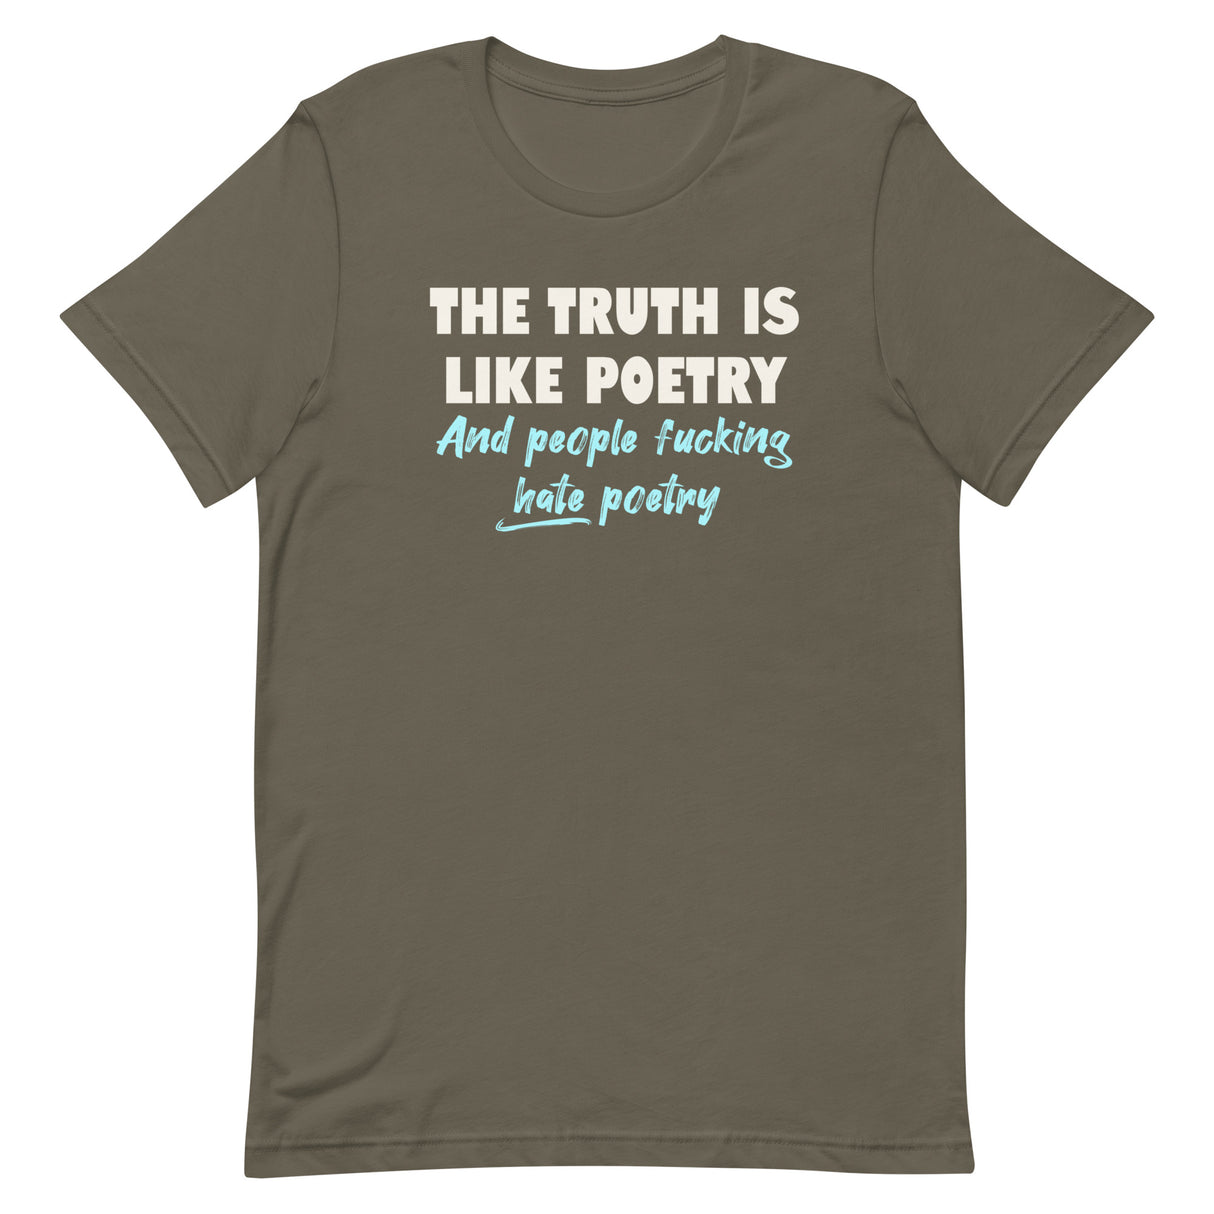 The Truth is Like Poetry Shirt - Libertarian Country